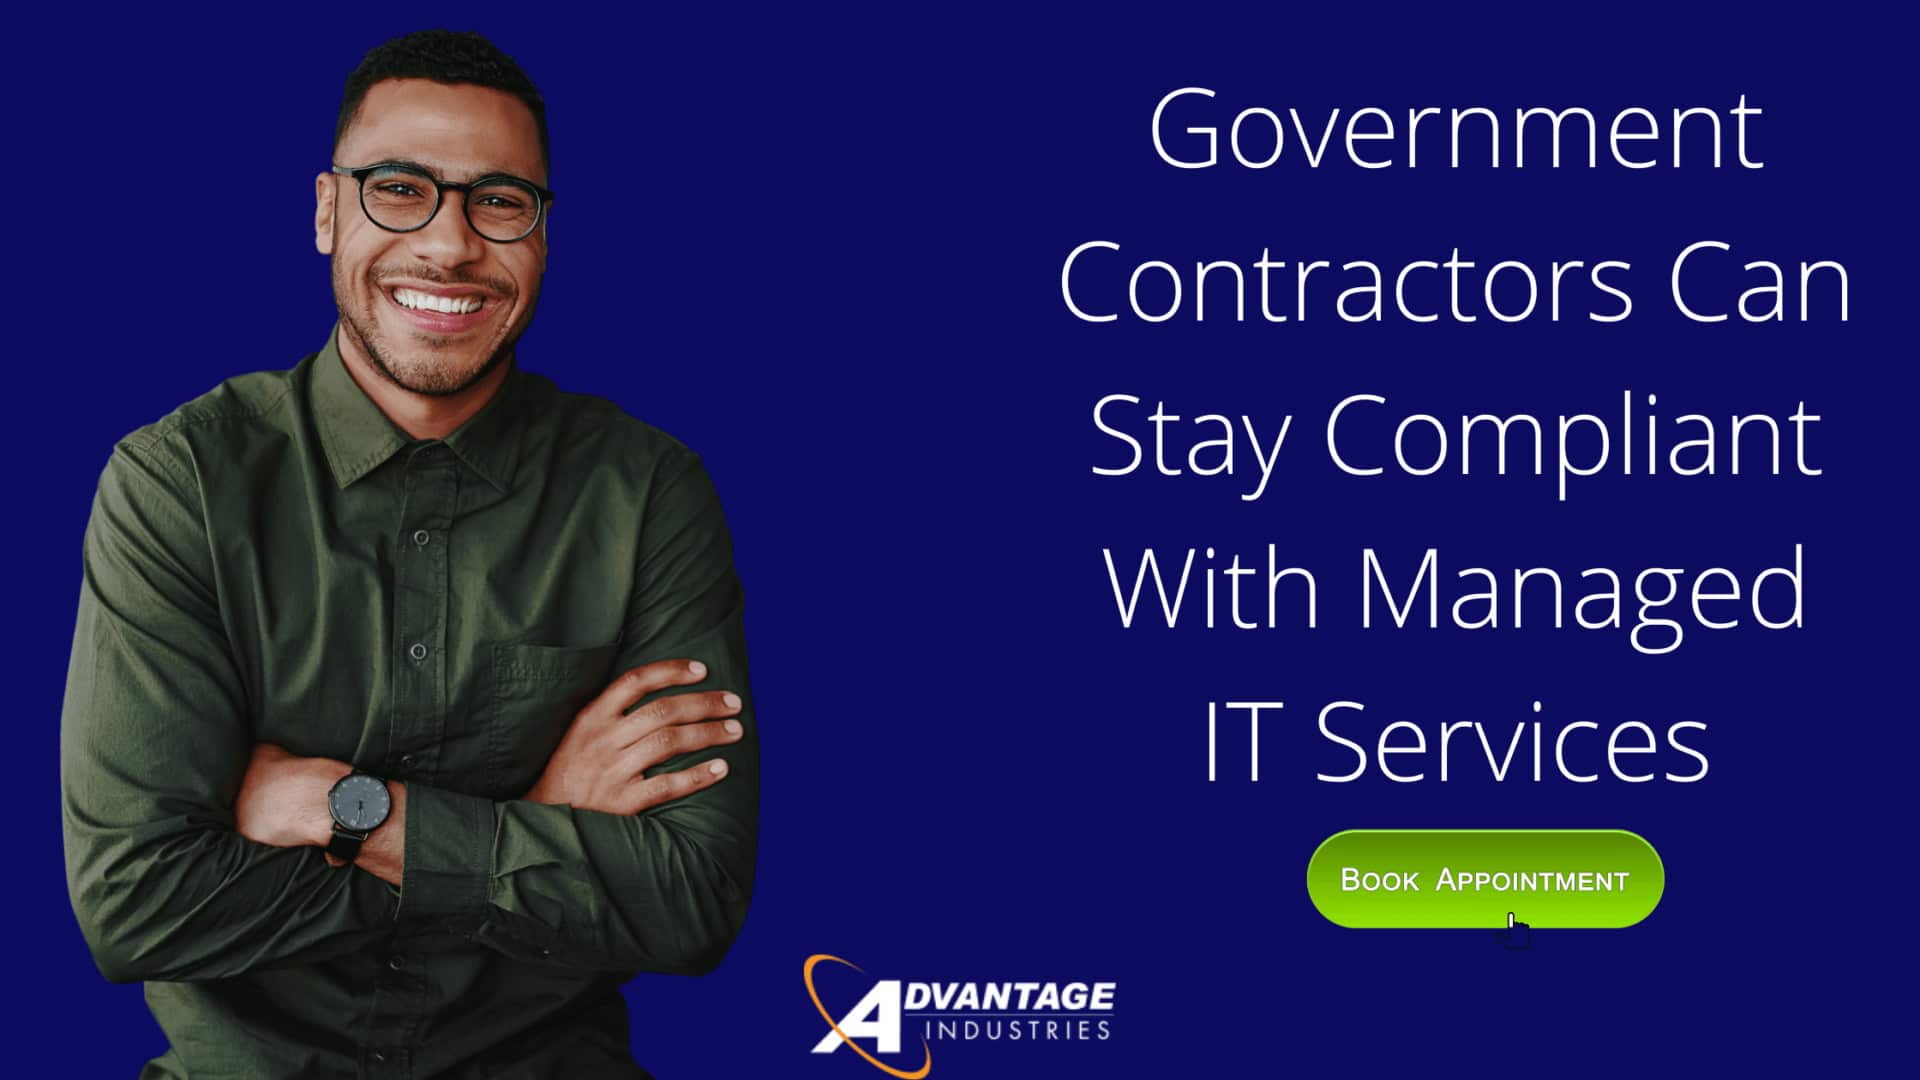 How Government Contractors Can Stay Compliant With Managed IT Services